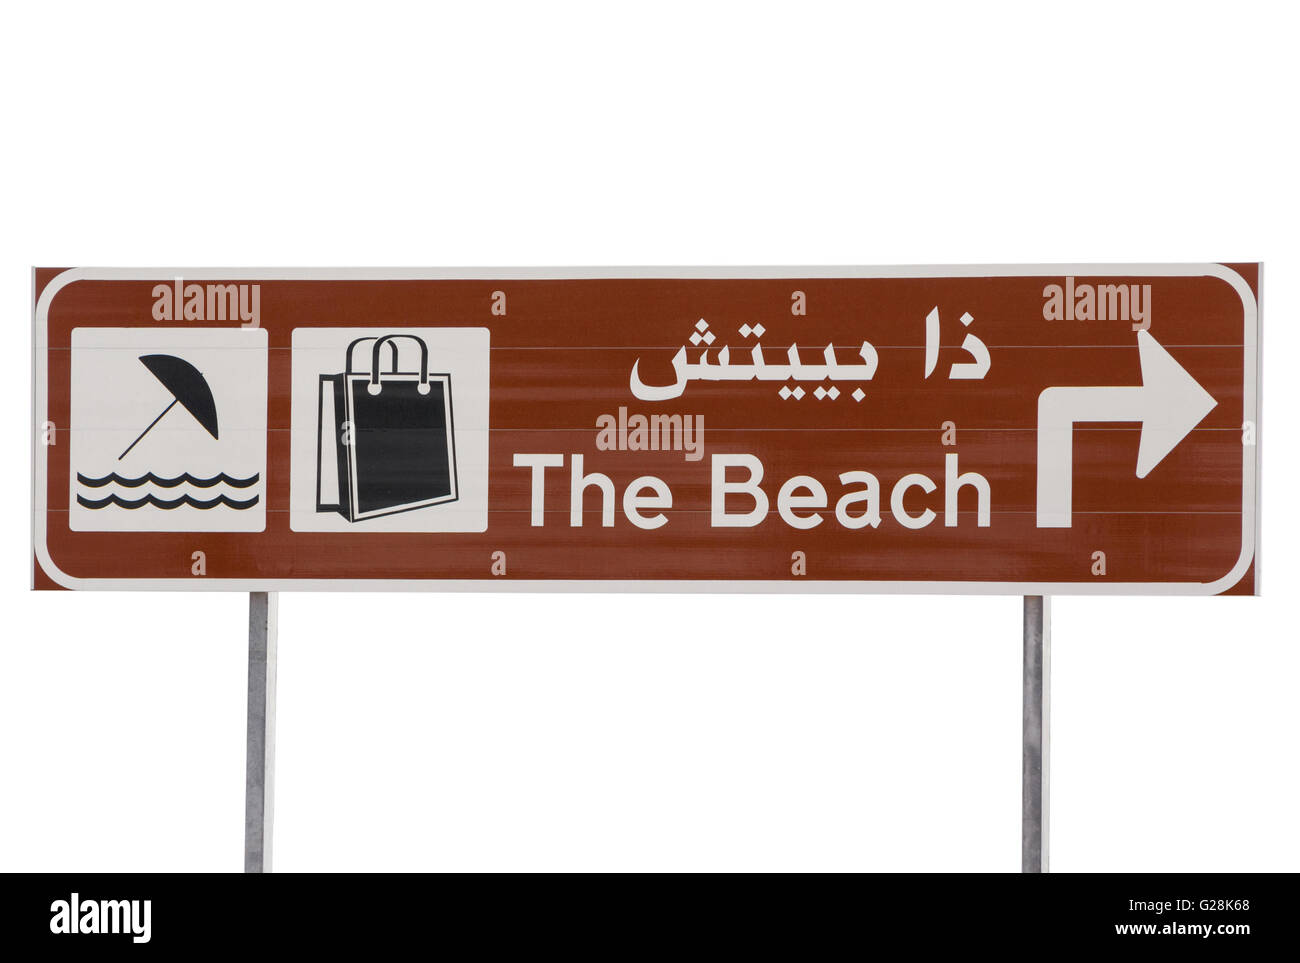 road sign pointing to the Beach in Dubai Stock Photo